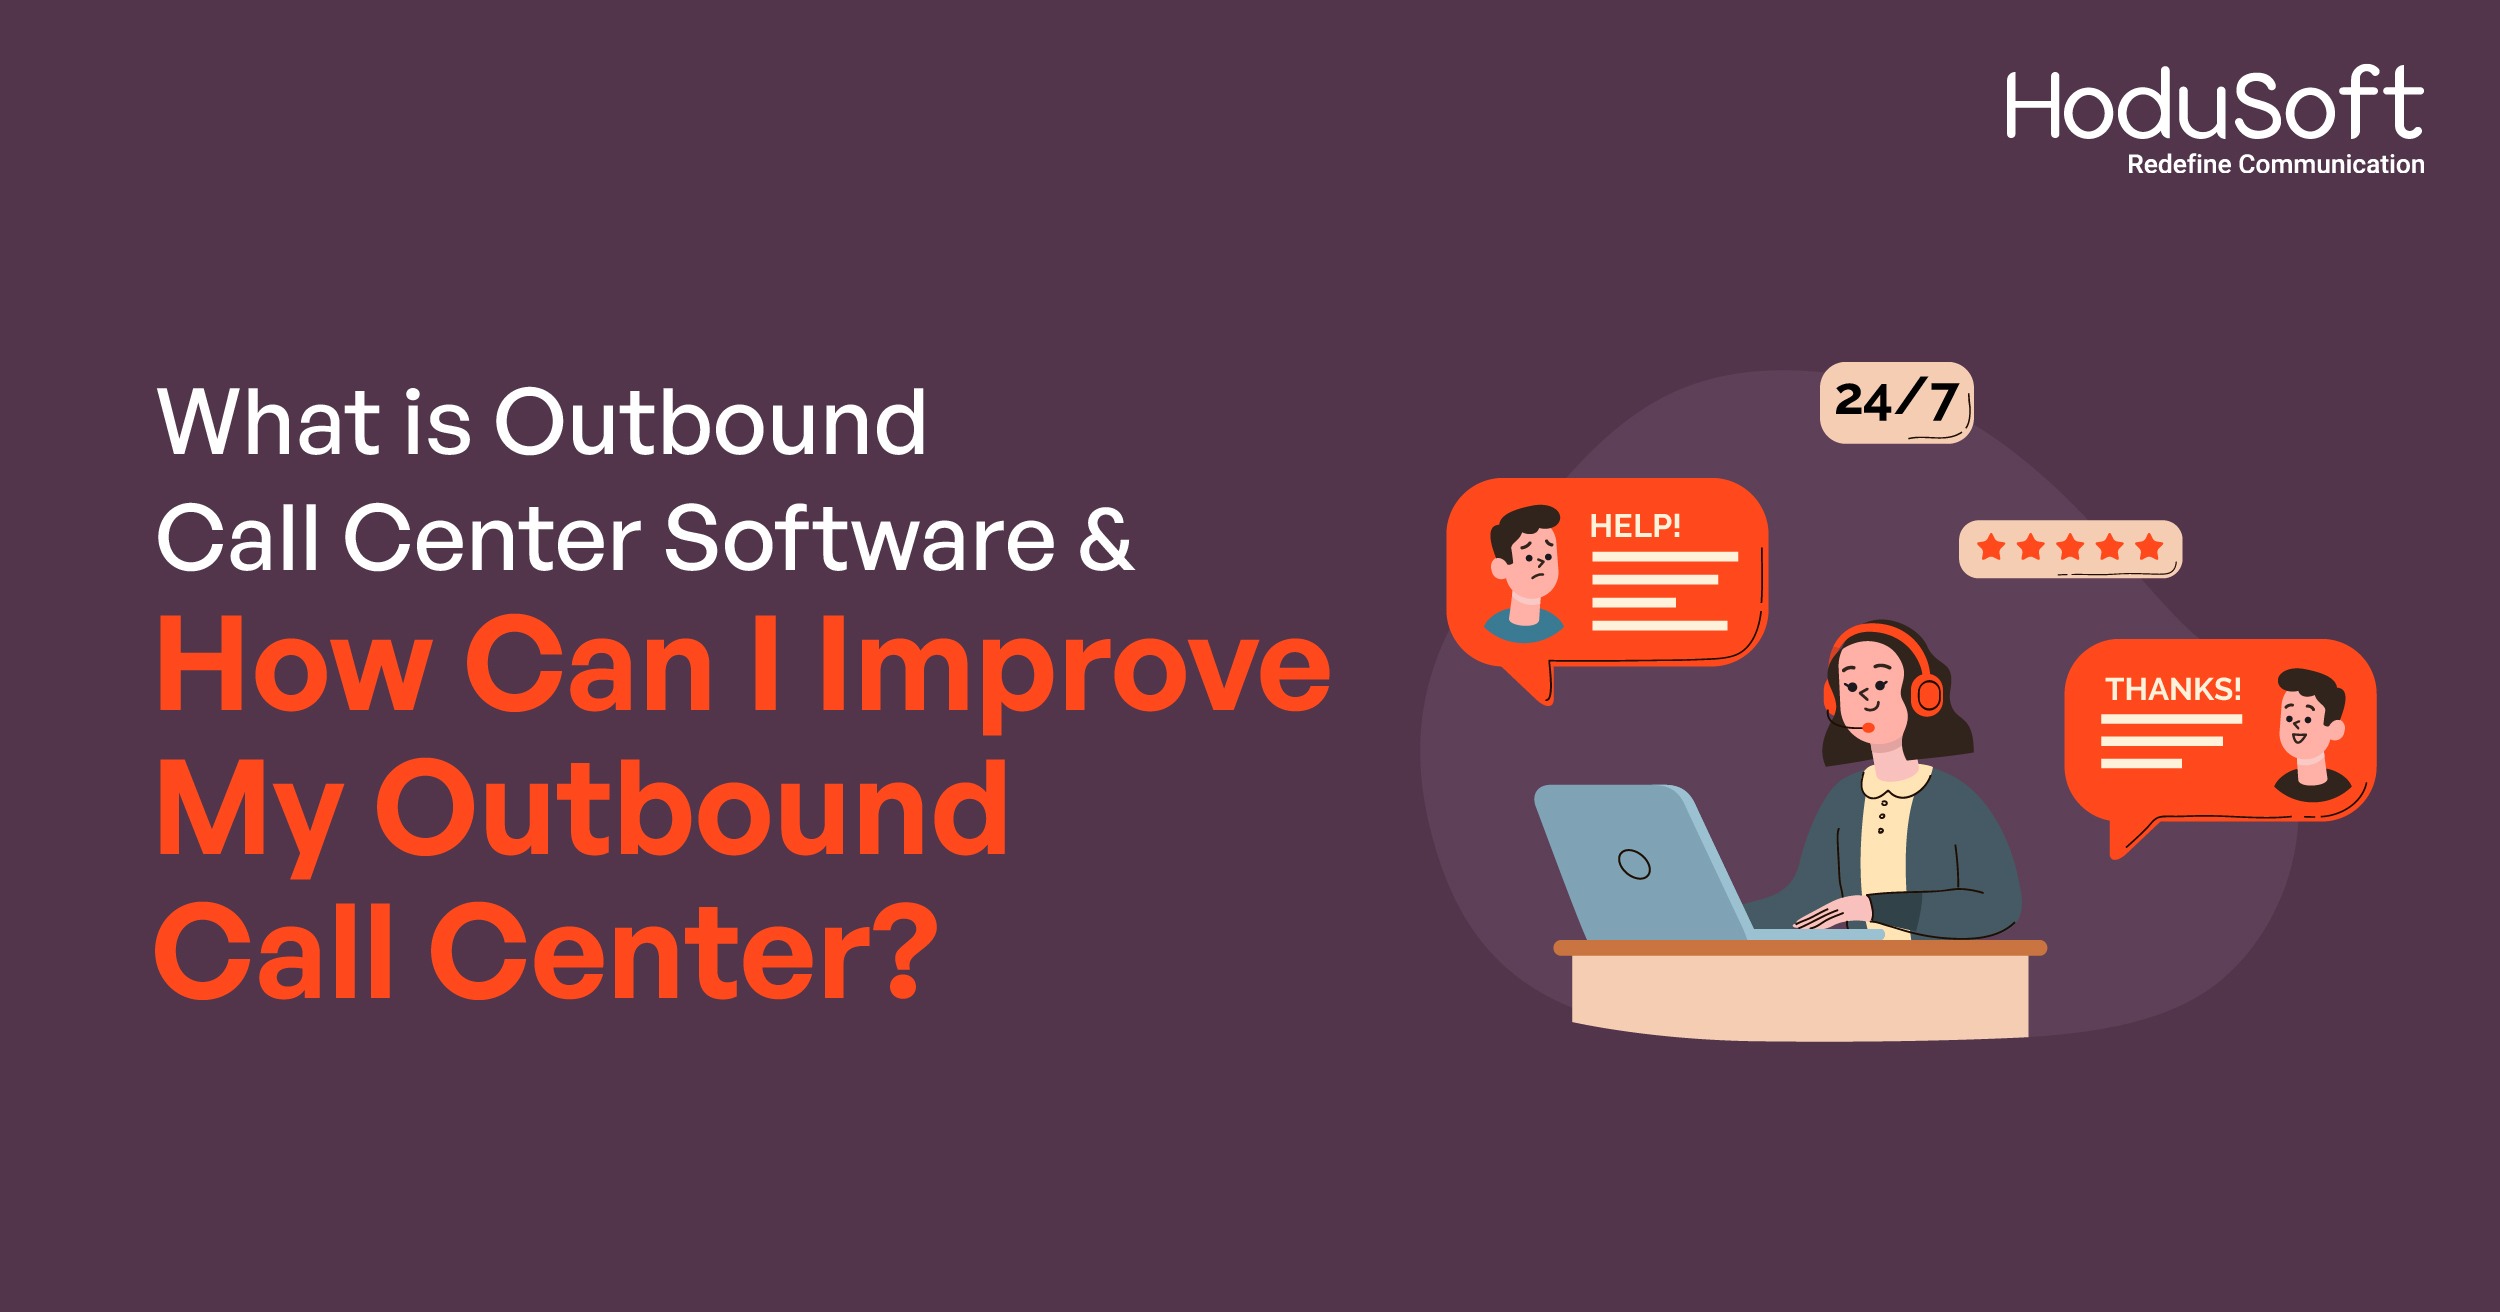 what is outbound call center software and how can i improve it